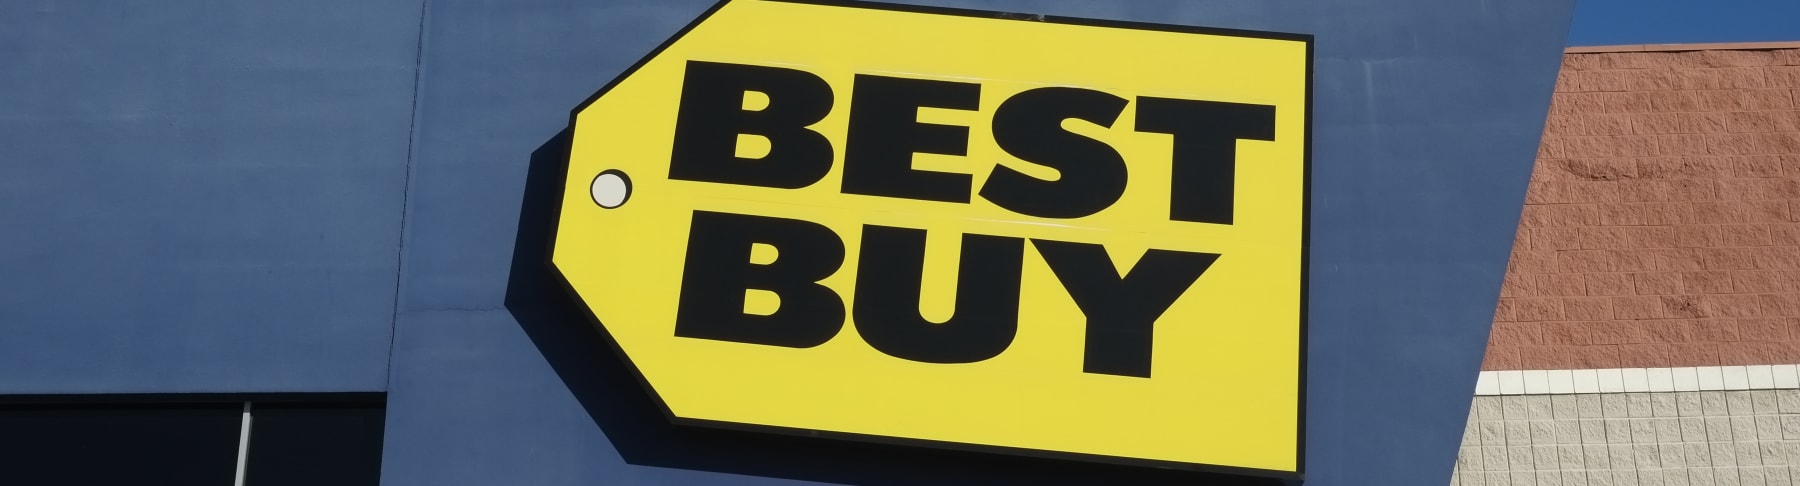 Yellow Best Buy sign displayed on store exterior.